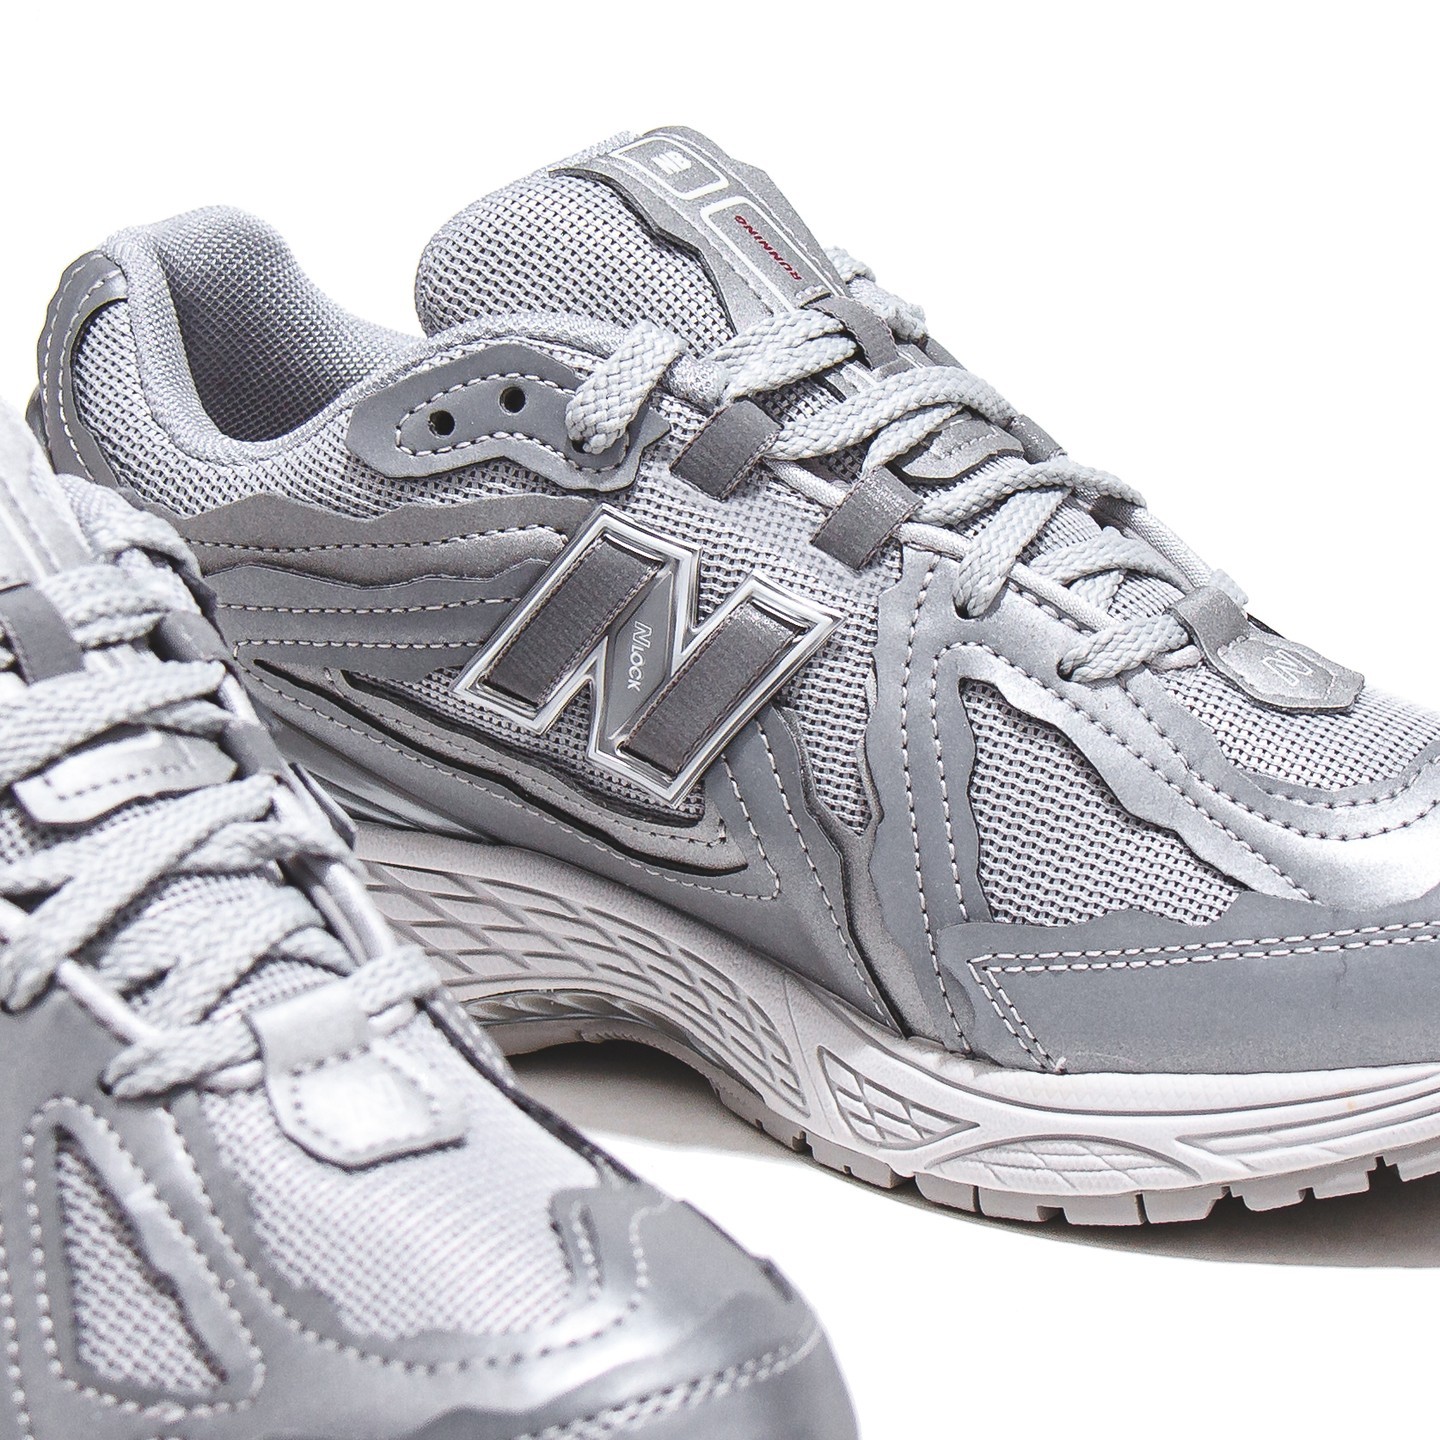 New Balance's Protection Pack 1906 Shoe Is Sharp in Silver